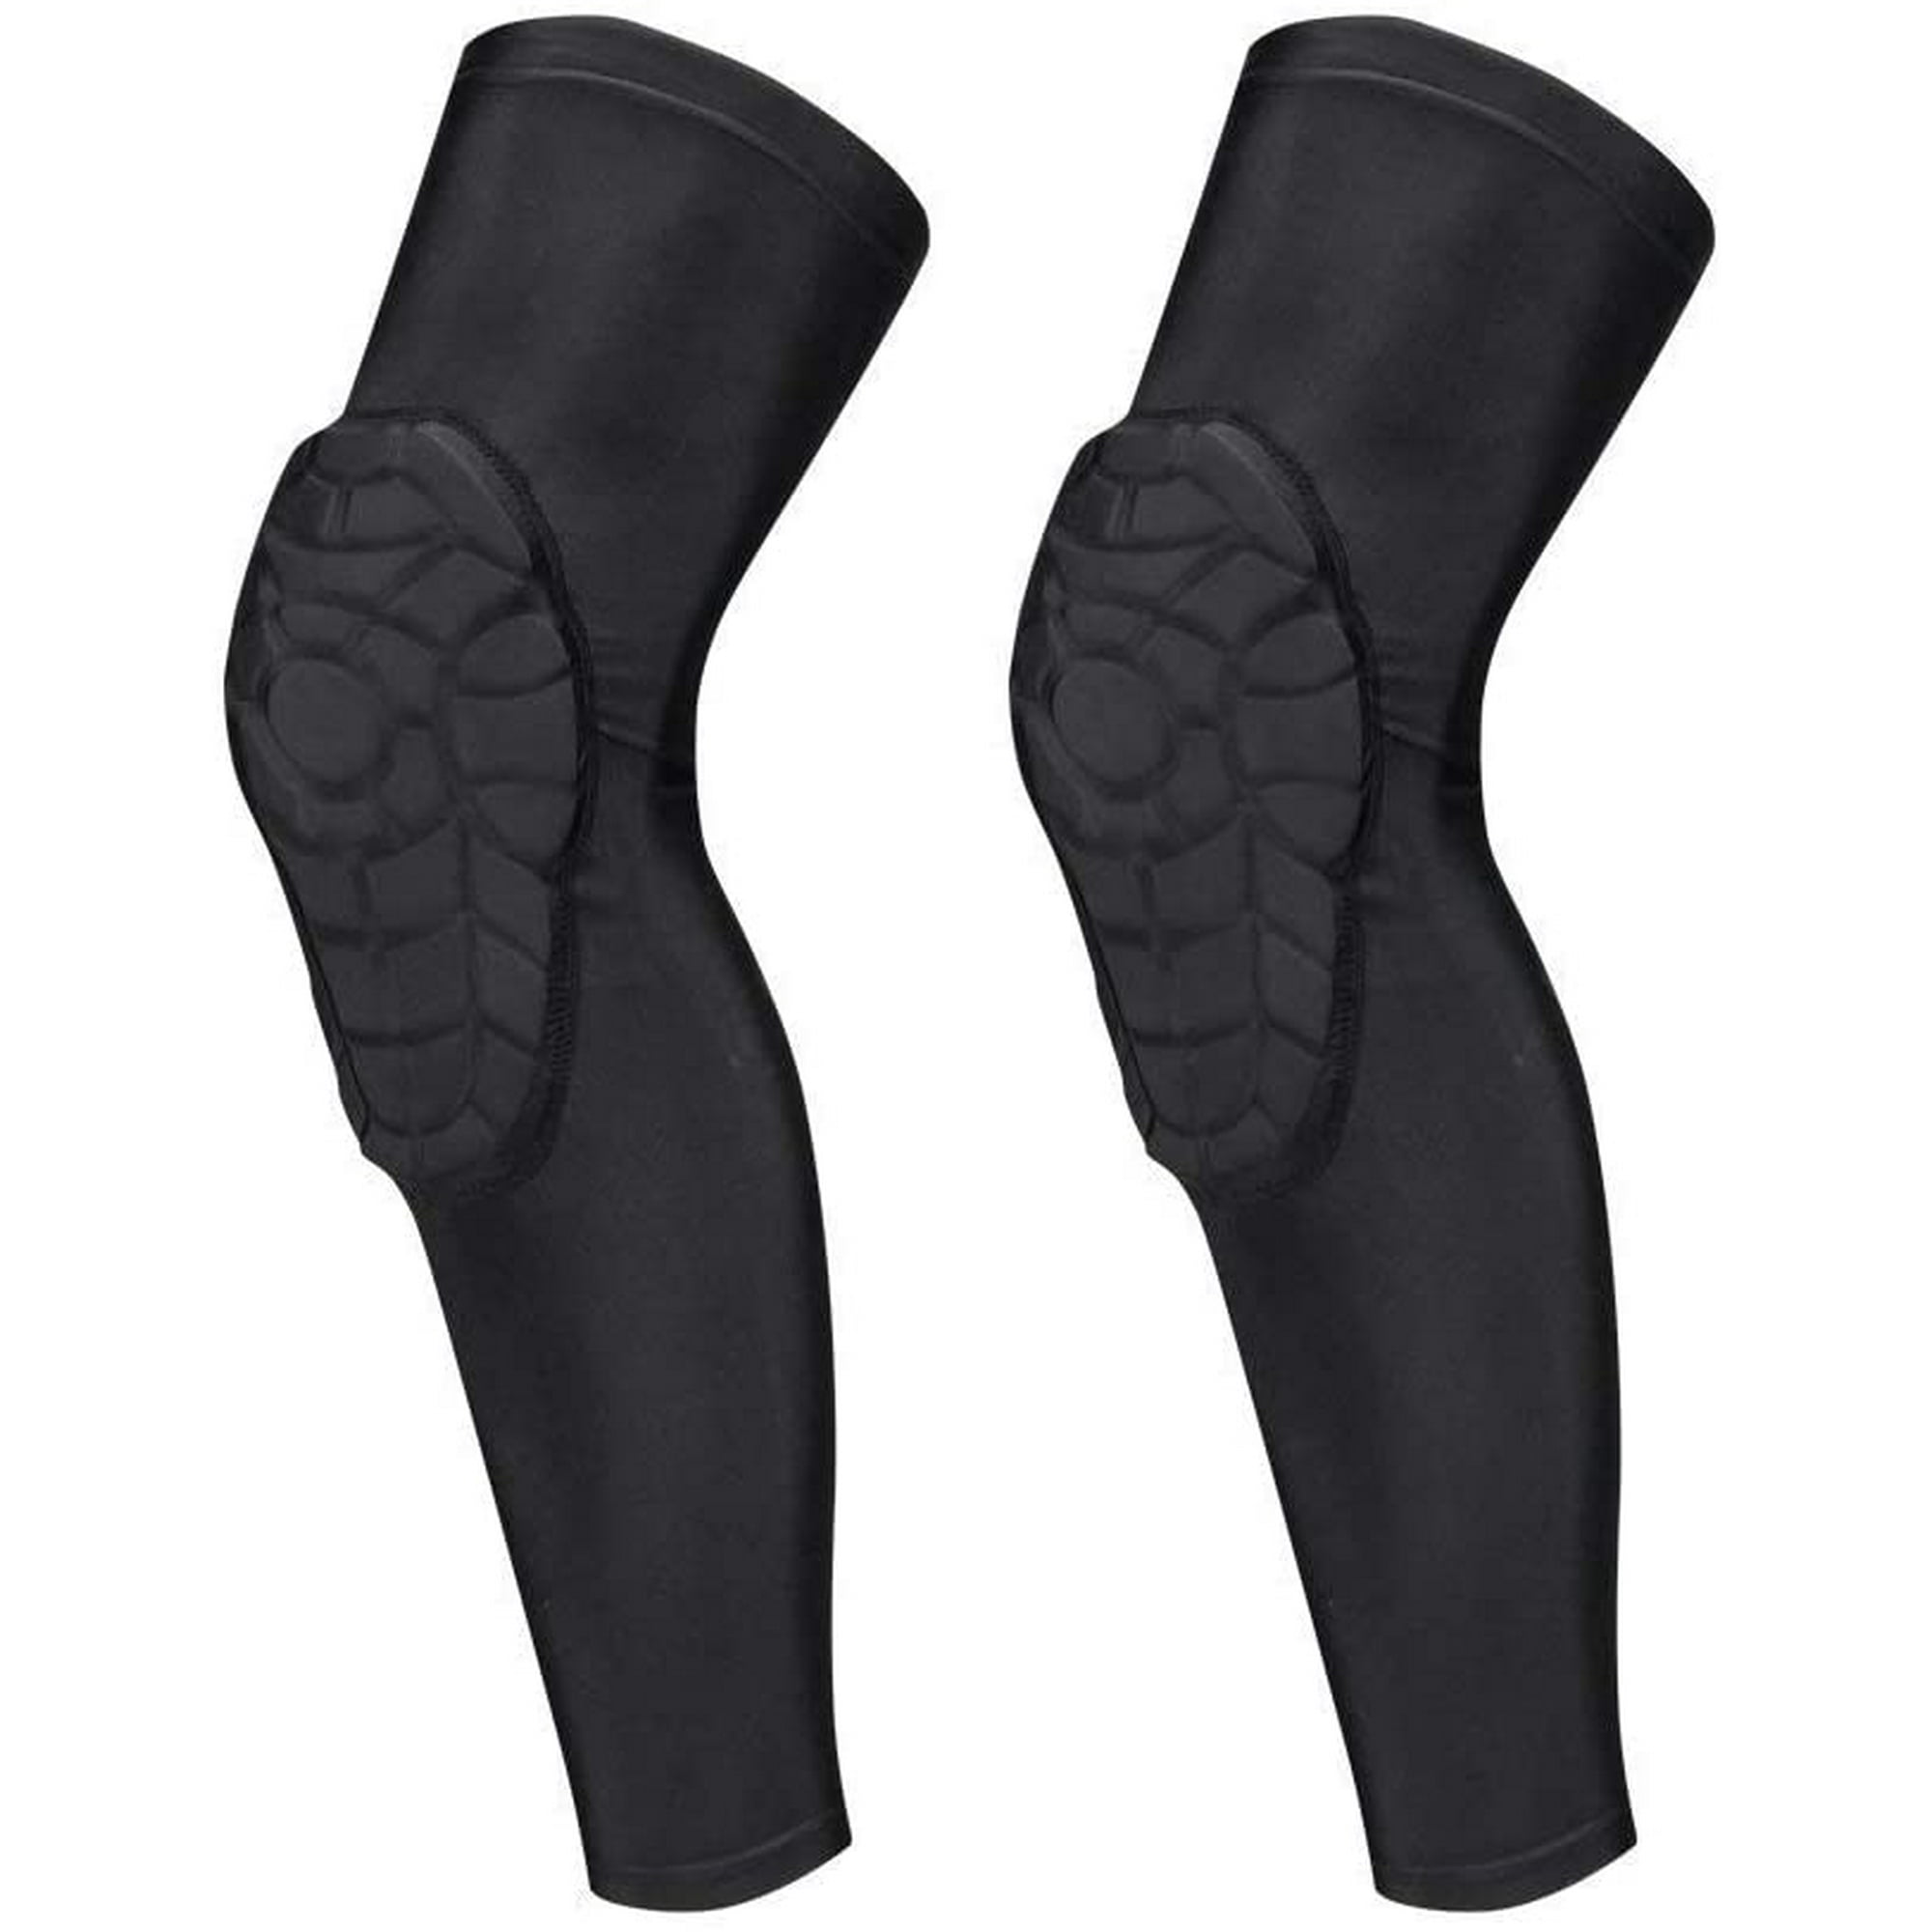 TUOY Kids Youth Knee Pads Padded Compression Knee Sleeve Protector